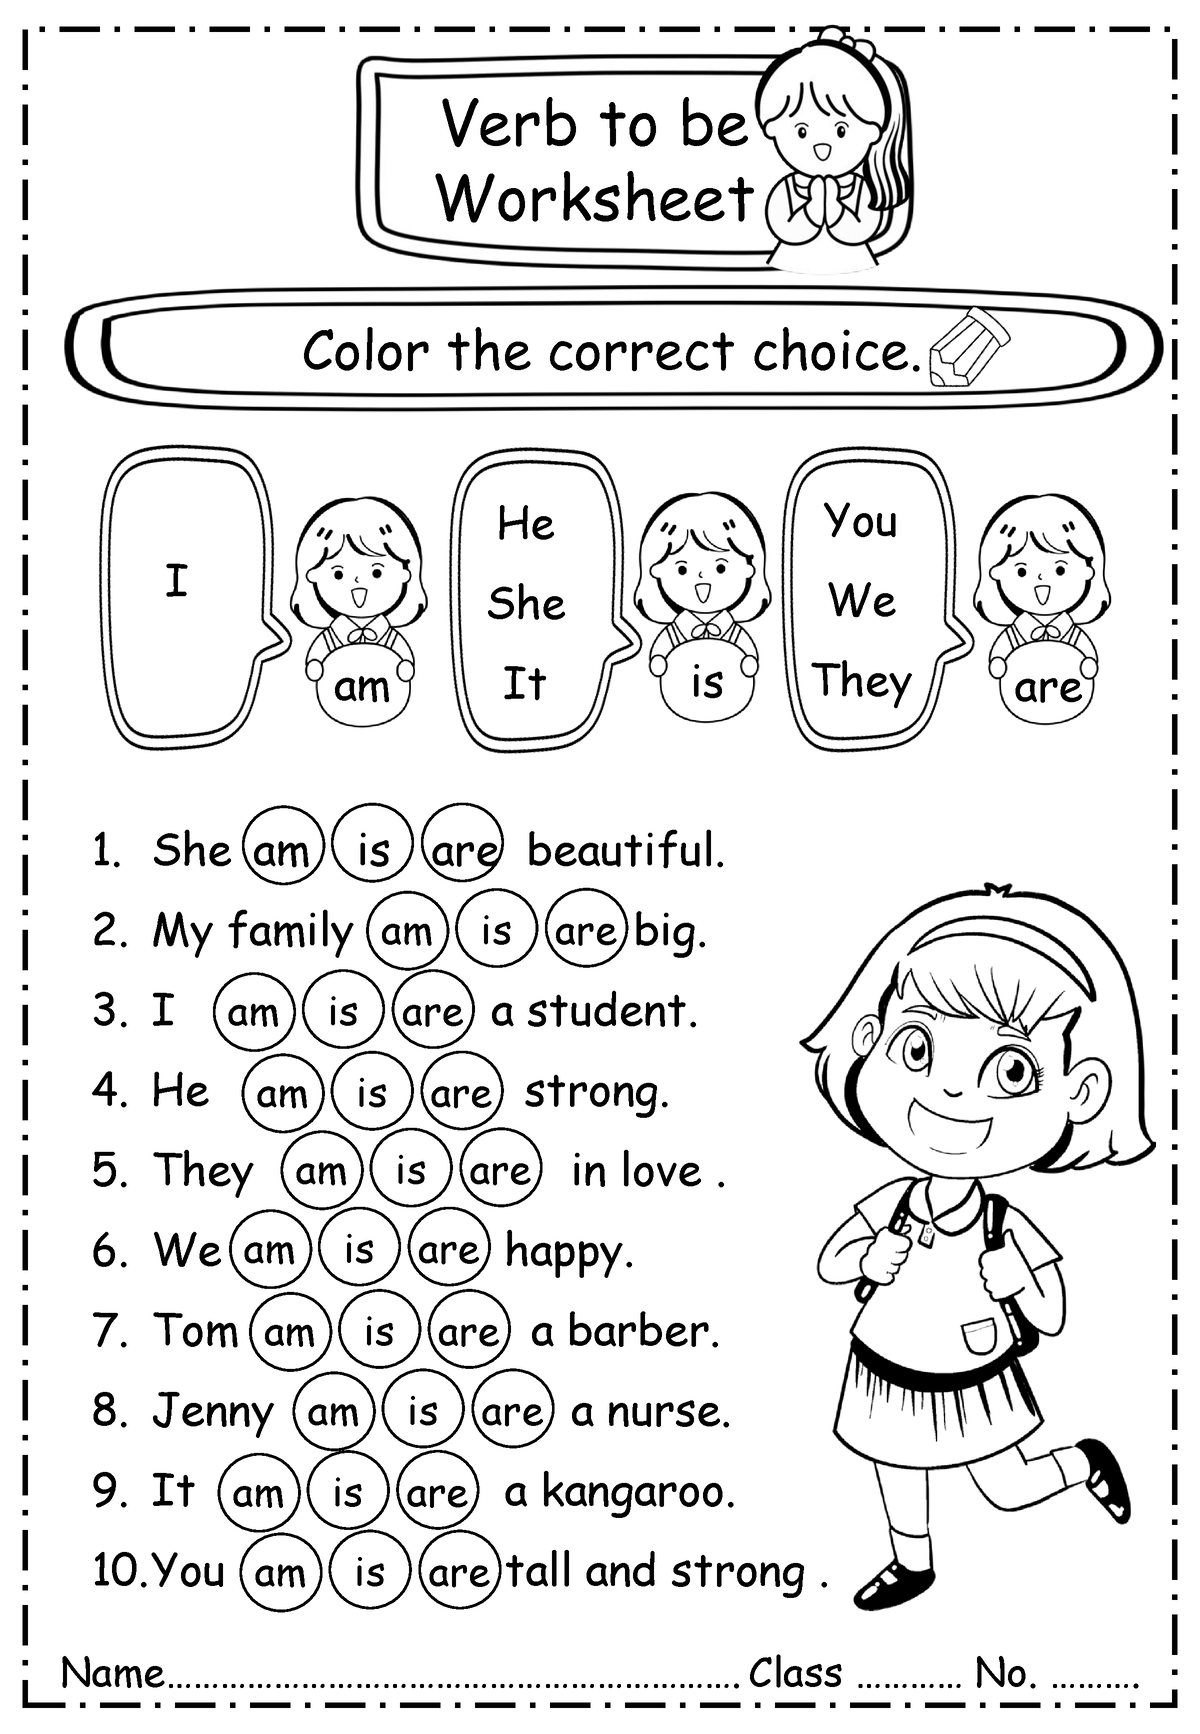 verb-to-be-worksheet-to-be-worksheet-color-the-correct-choice-1